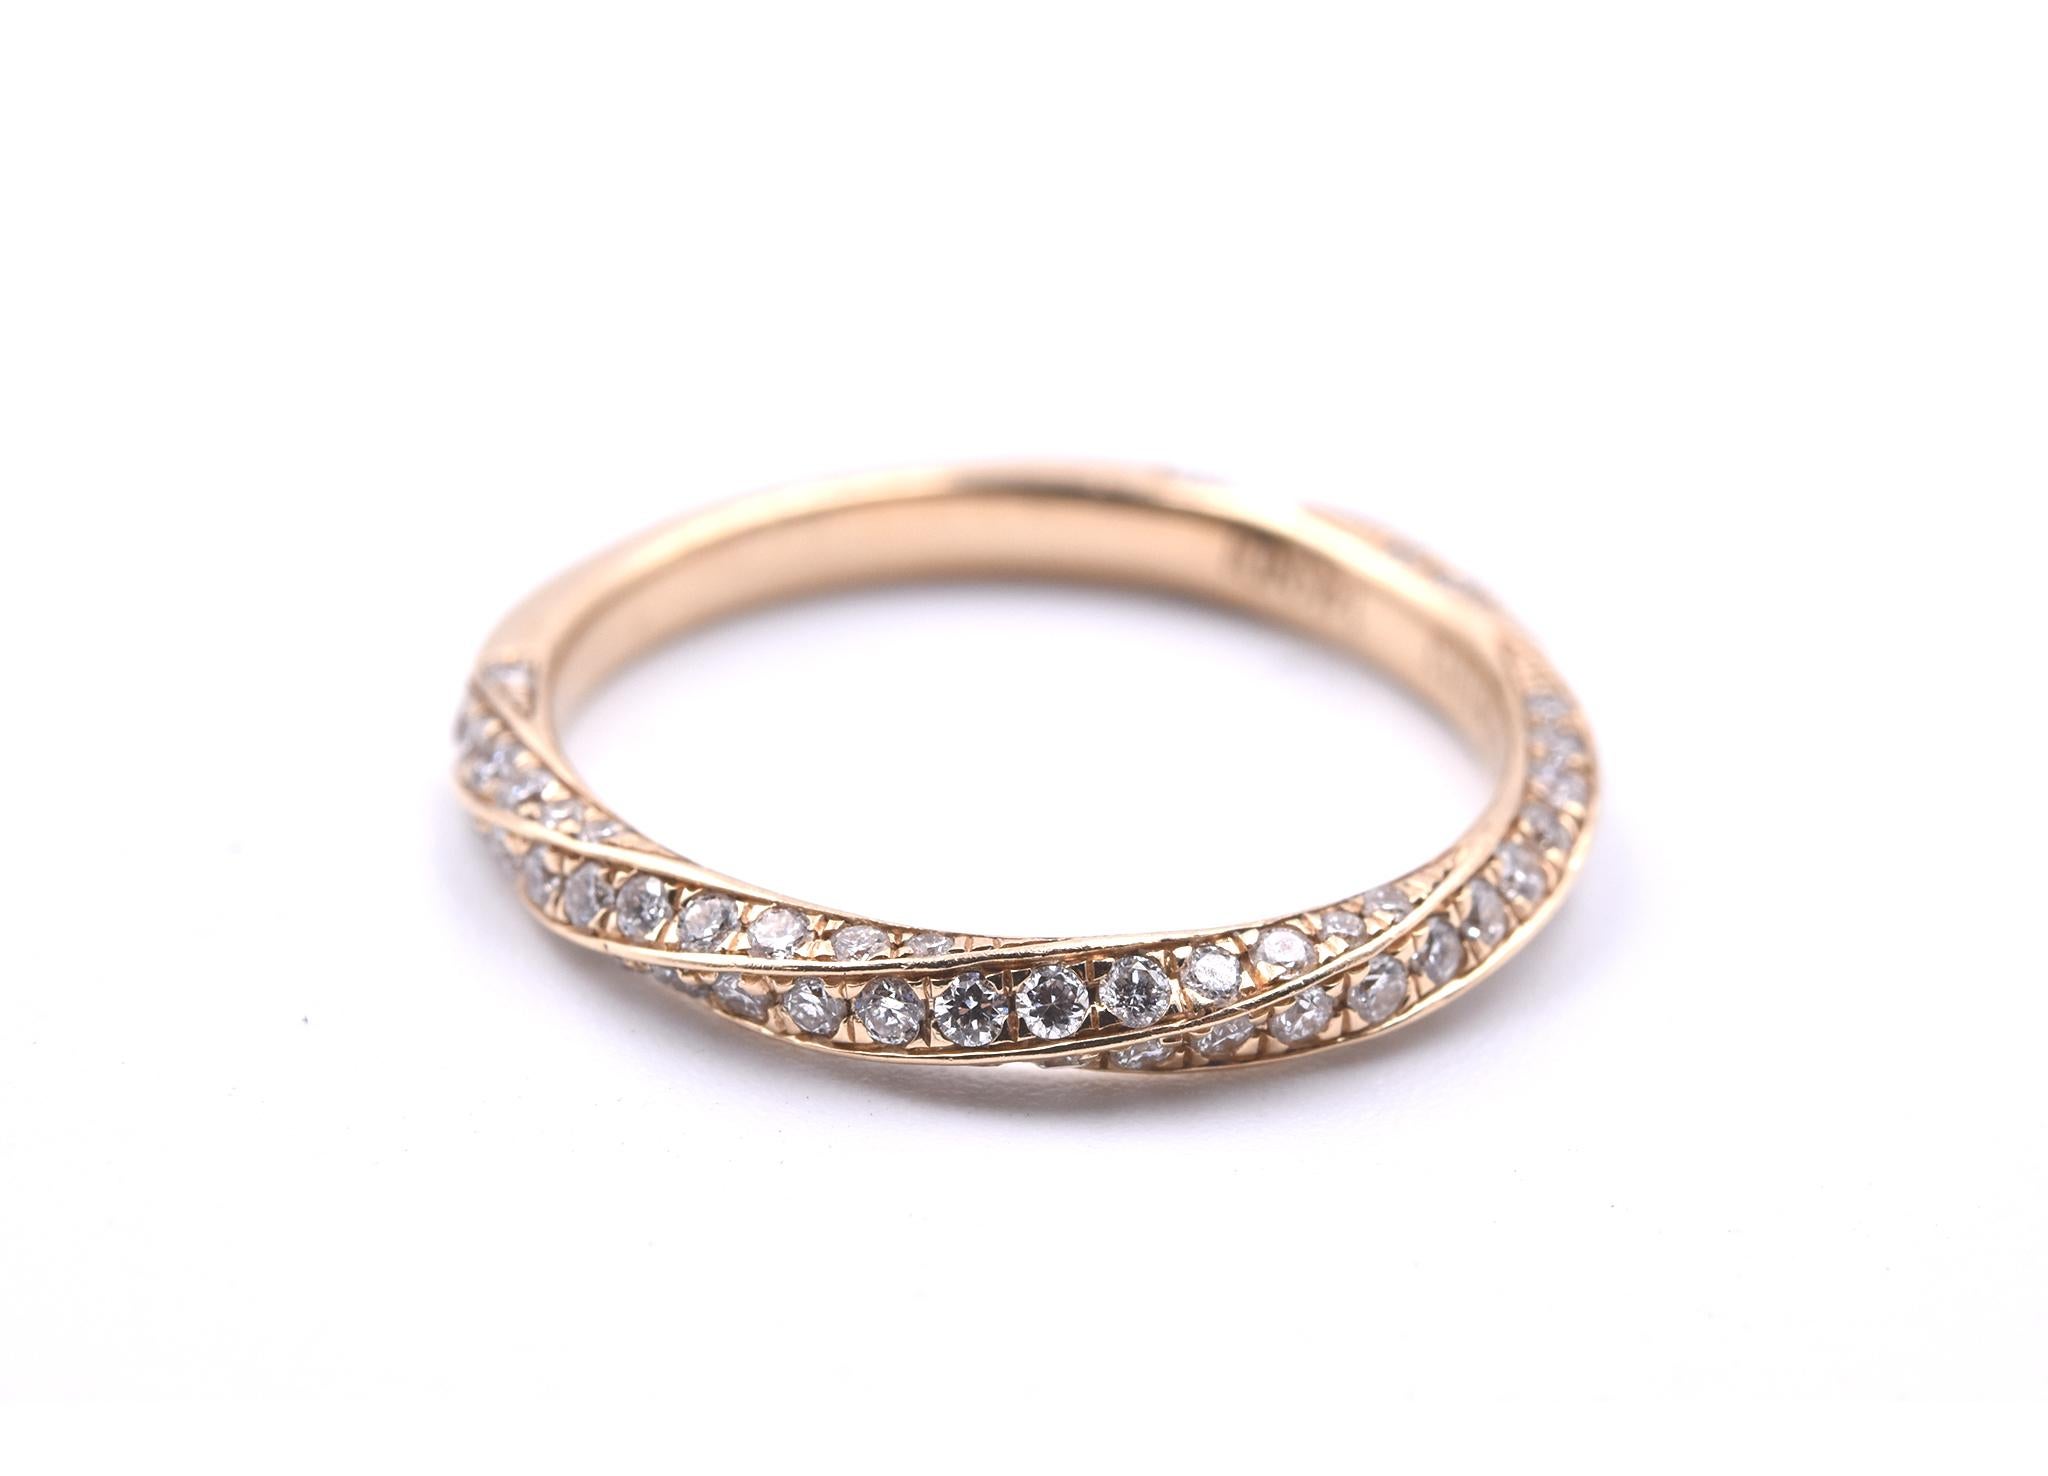 Designer: custom design
Material: 14k yellow gold
Diamonds: round brilliant cut =0.55cttw
Color: G
Clarity: VS
Ring size: 6 ½ (please allow two additional shipping days for sizing requests)
Dimensions: ring is approximately 2.60mm wide
Weight: 2.08